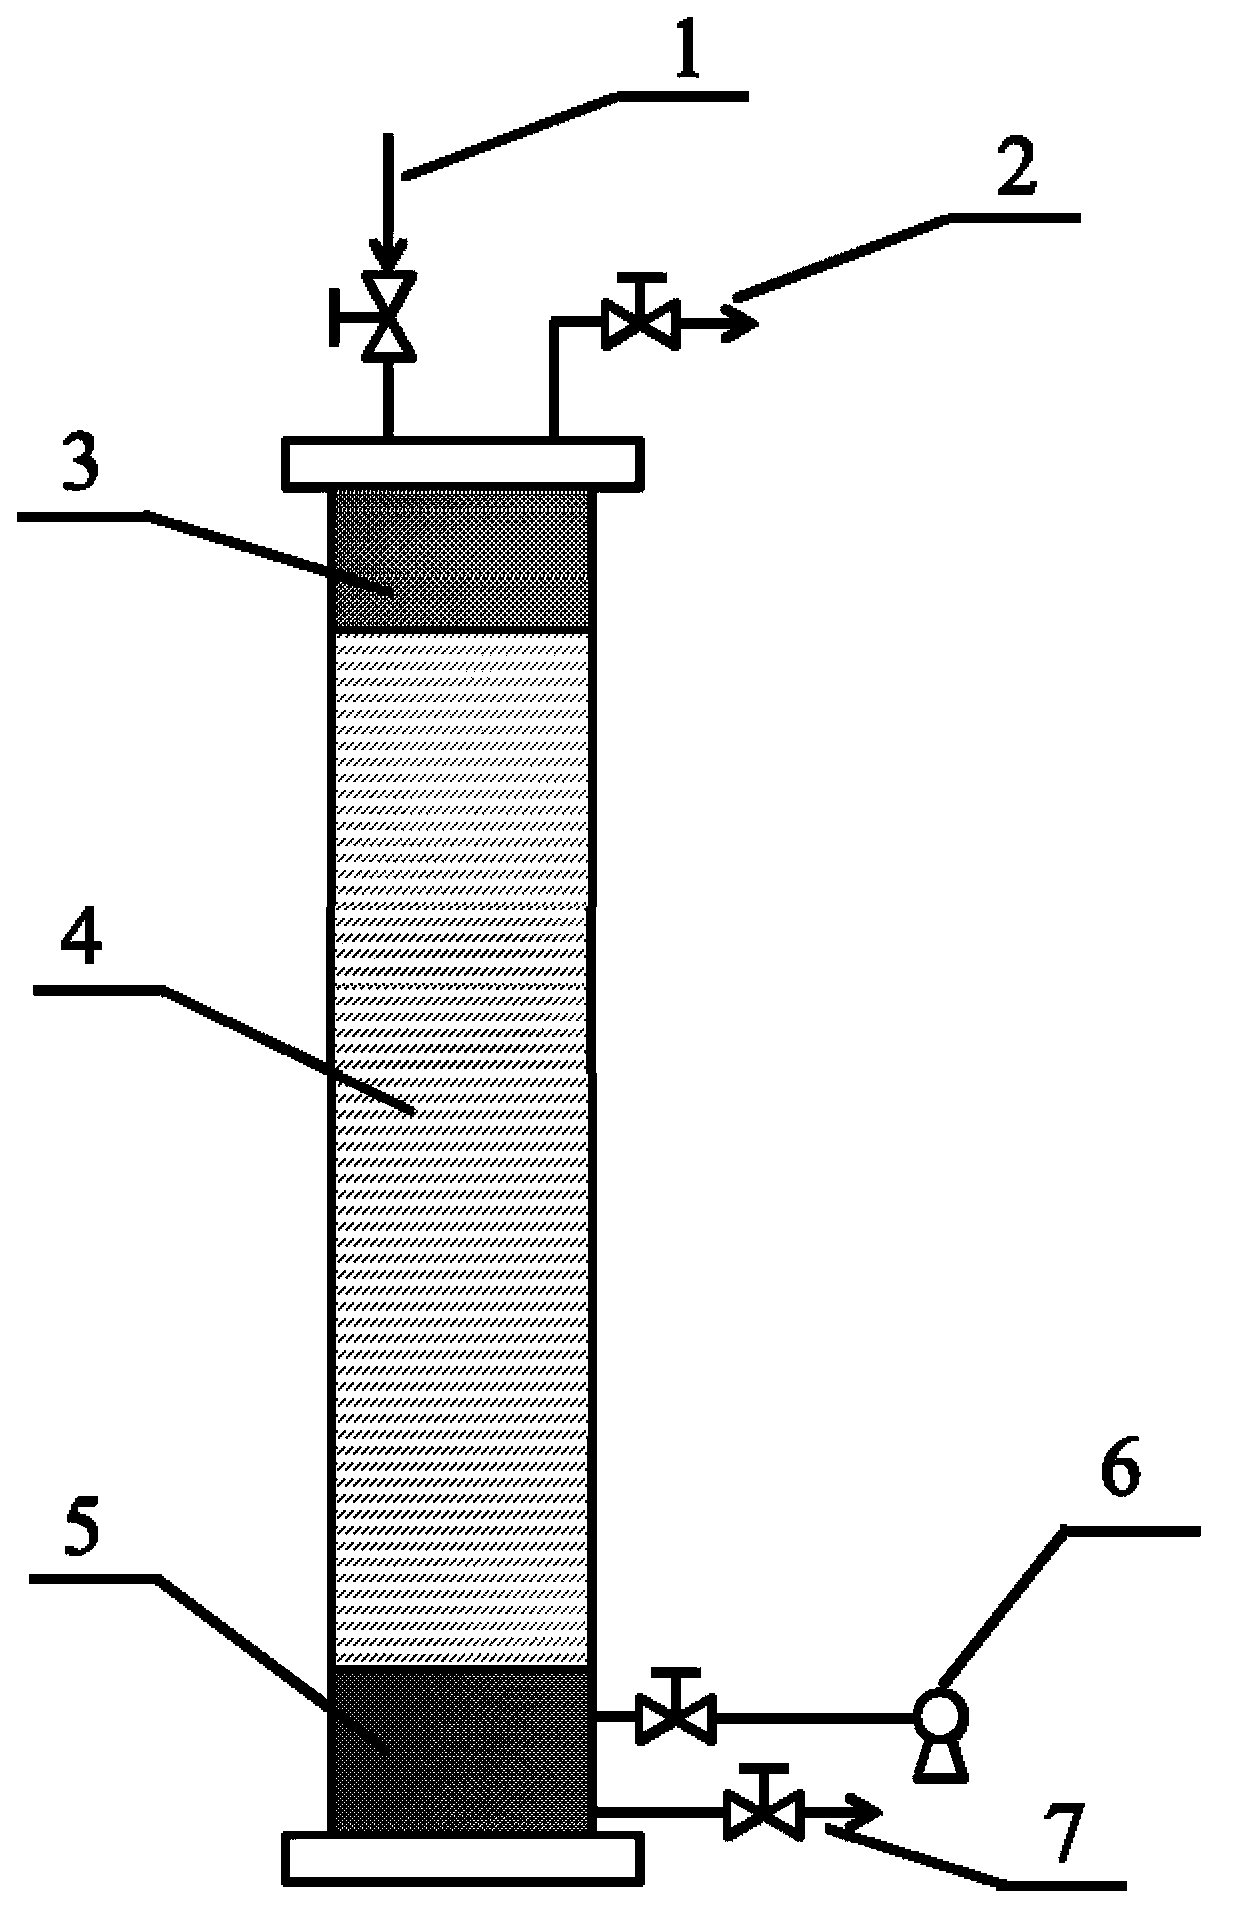 Method for controlling anaerobic digestion of easily-degradable organic wastes through utilizing intermittent micro-aeration